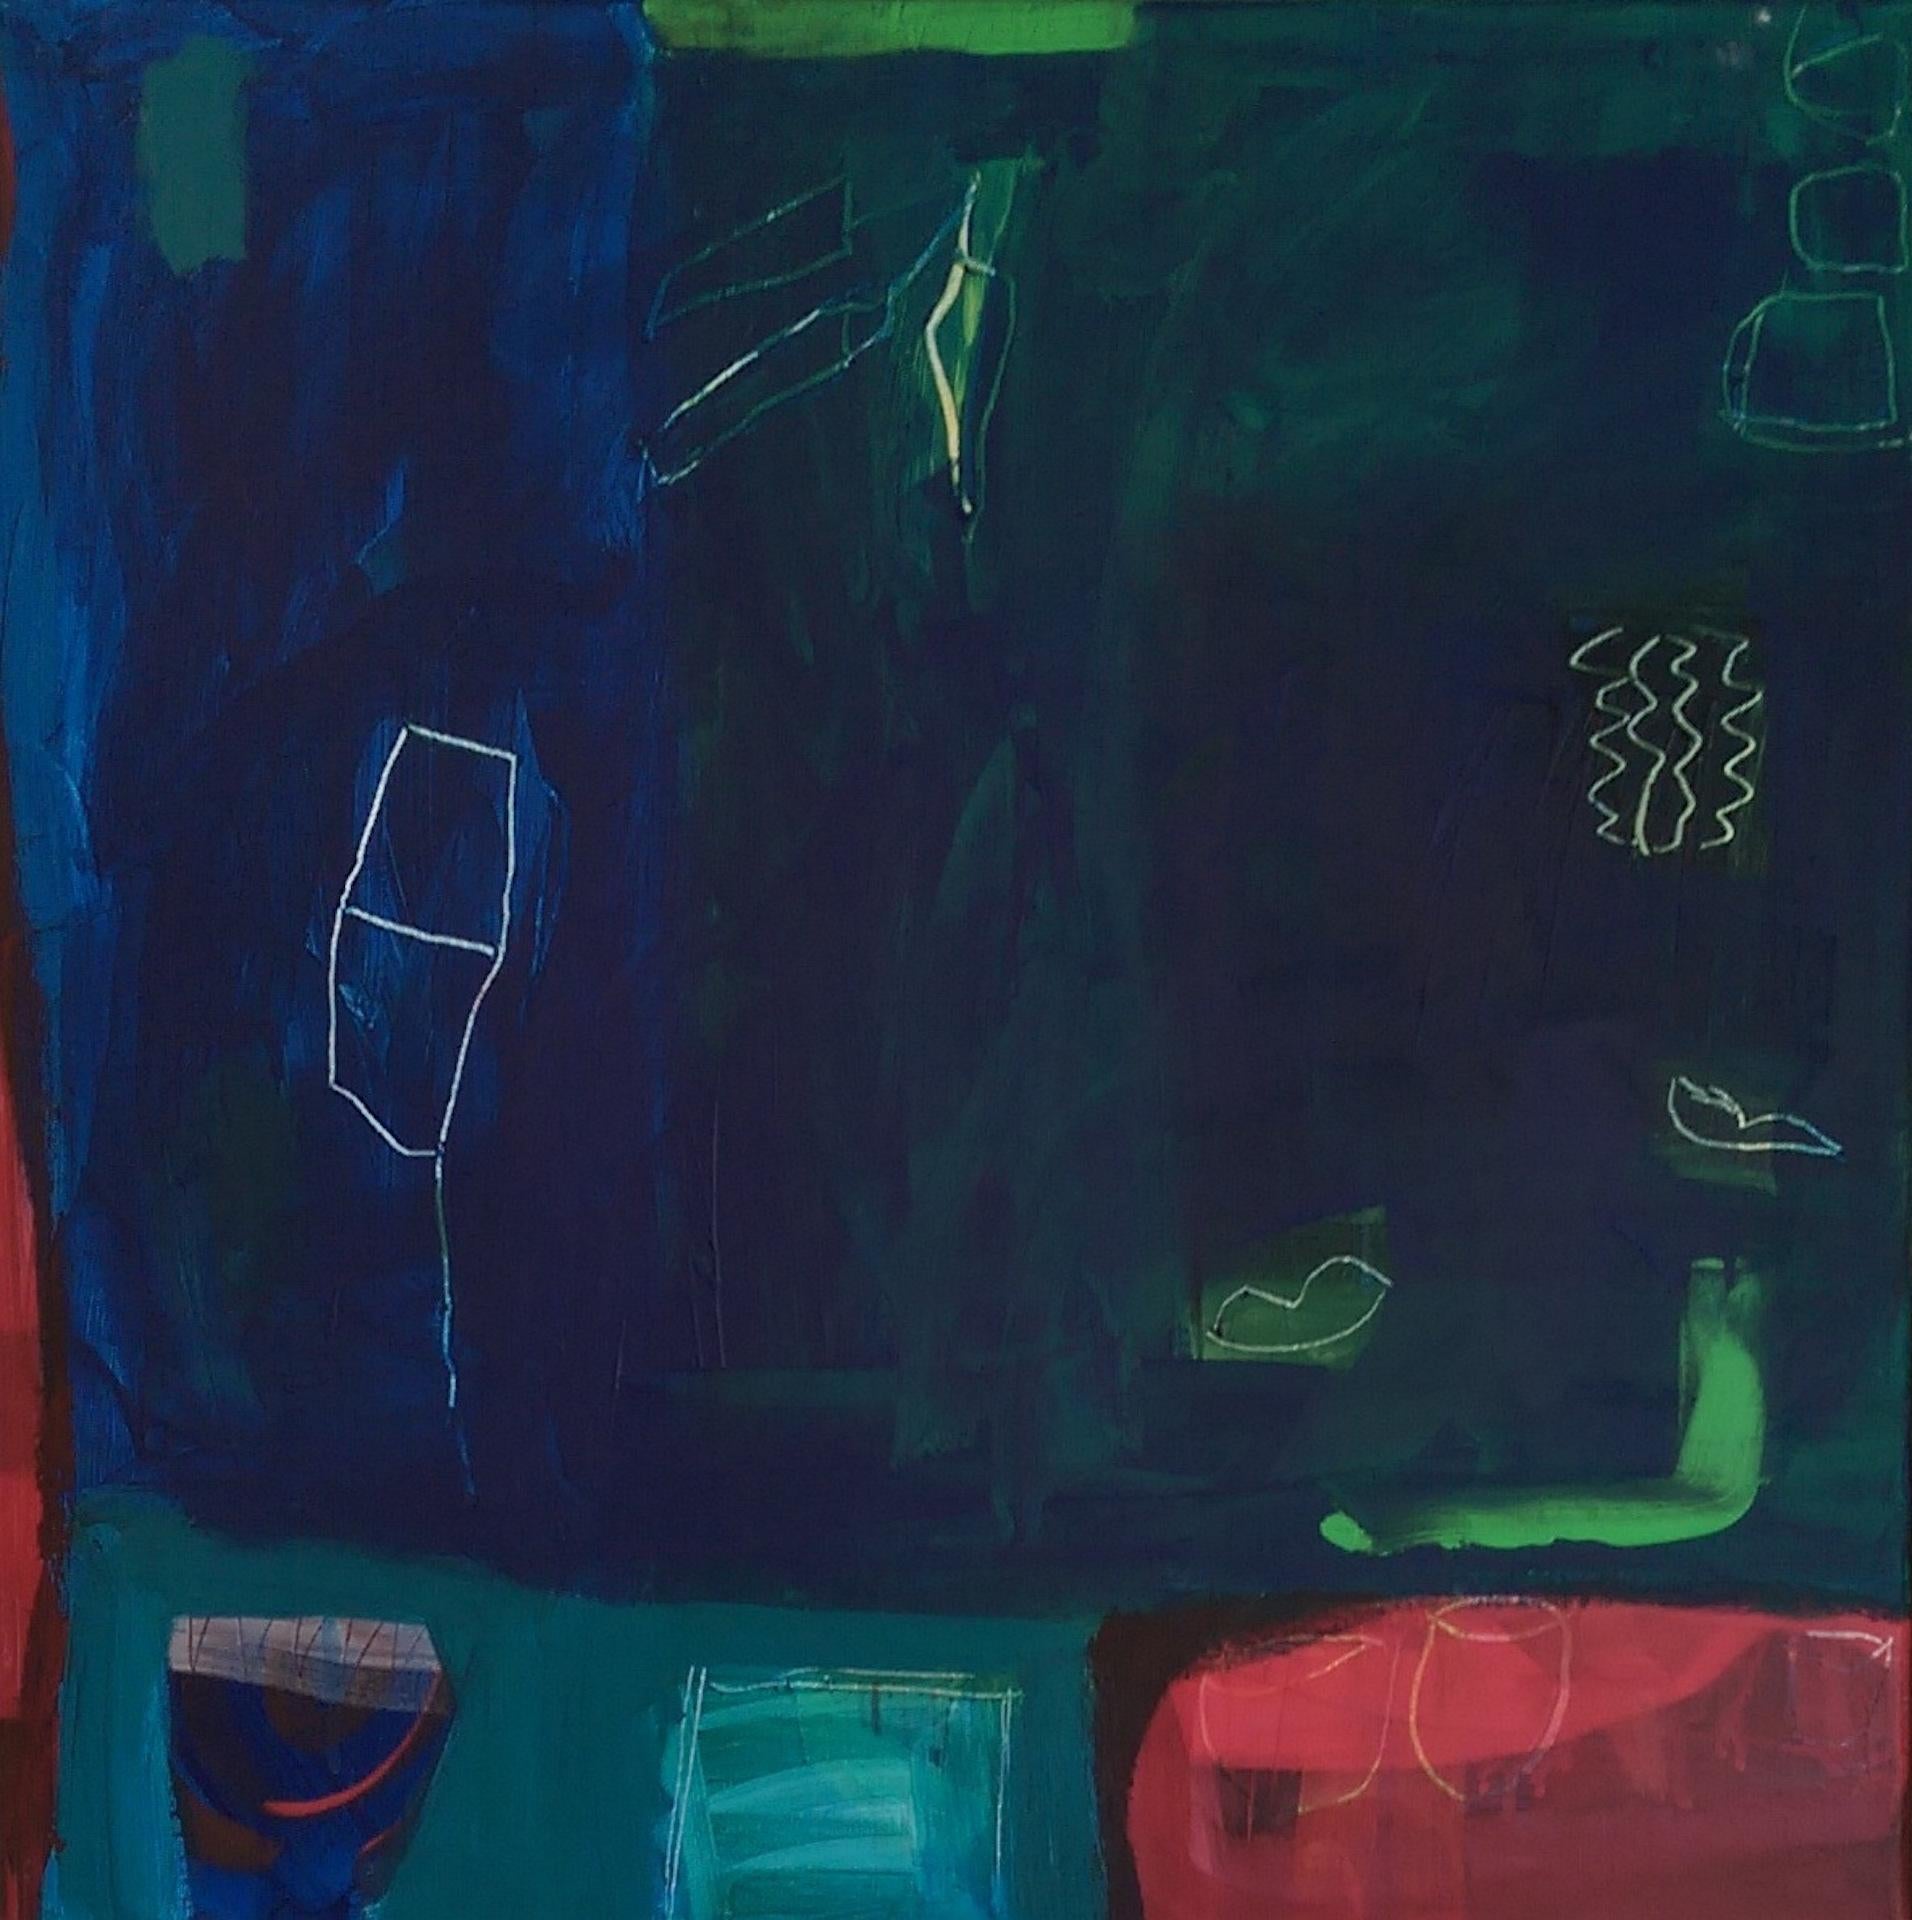 Diane Whalley
Nights on the Veranda
Contemporary Abstract Painting
Mixed Media on Canvas
Canvas Size: H 60cm x W 60cm
Framed Size: H 65cm x W 65cm x D 4cm
Sold Framed in a White Box Frame
Please note that in situ images are purely an indication of